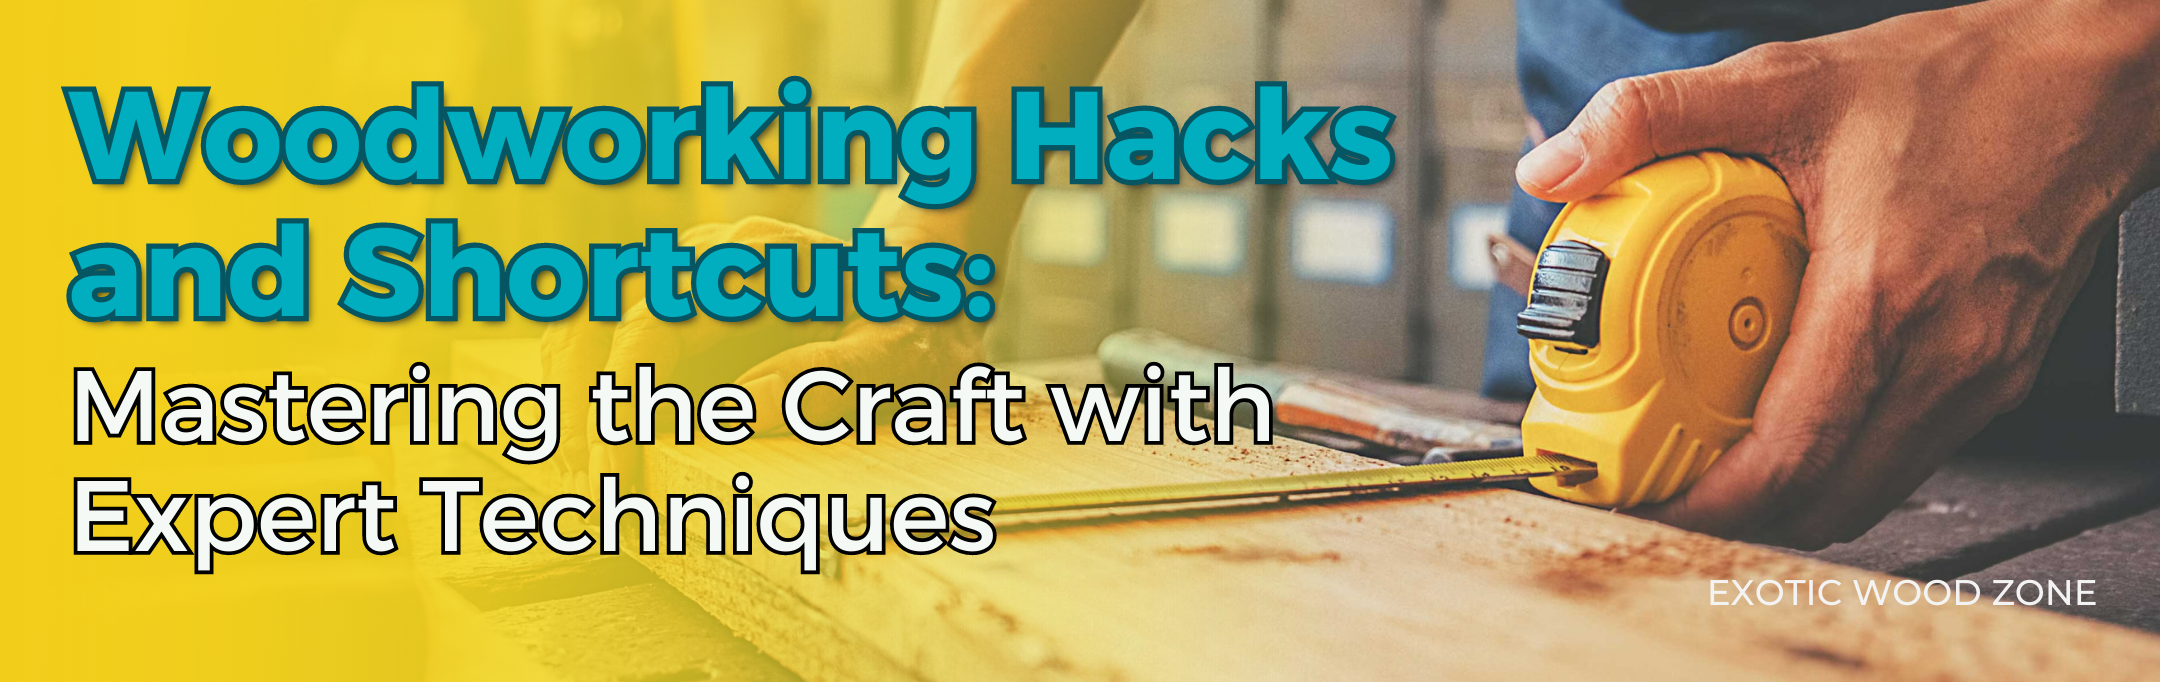 Woodworking Hacks and Shortcuts: Mastering the Craft with Expert Techniques